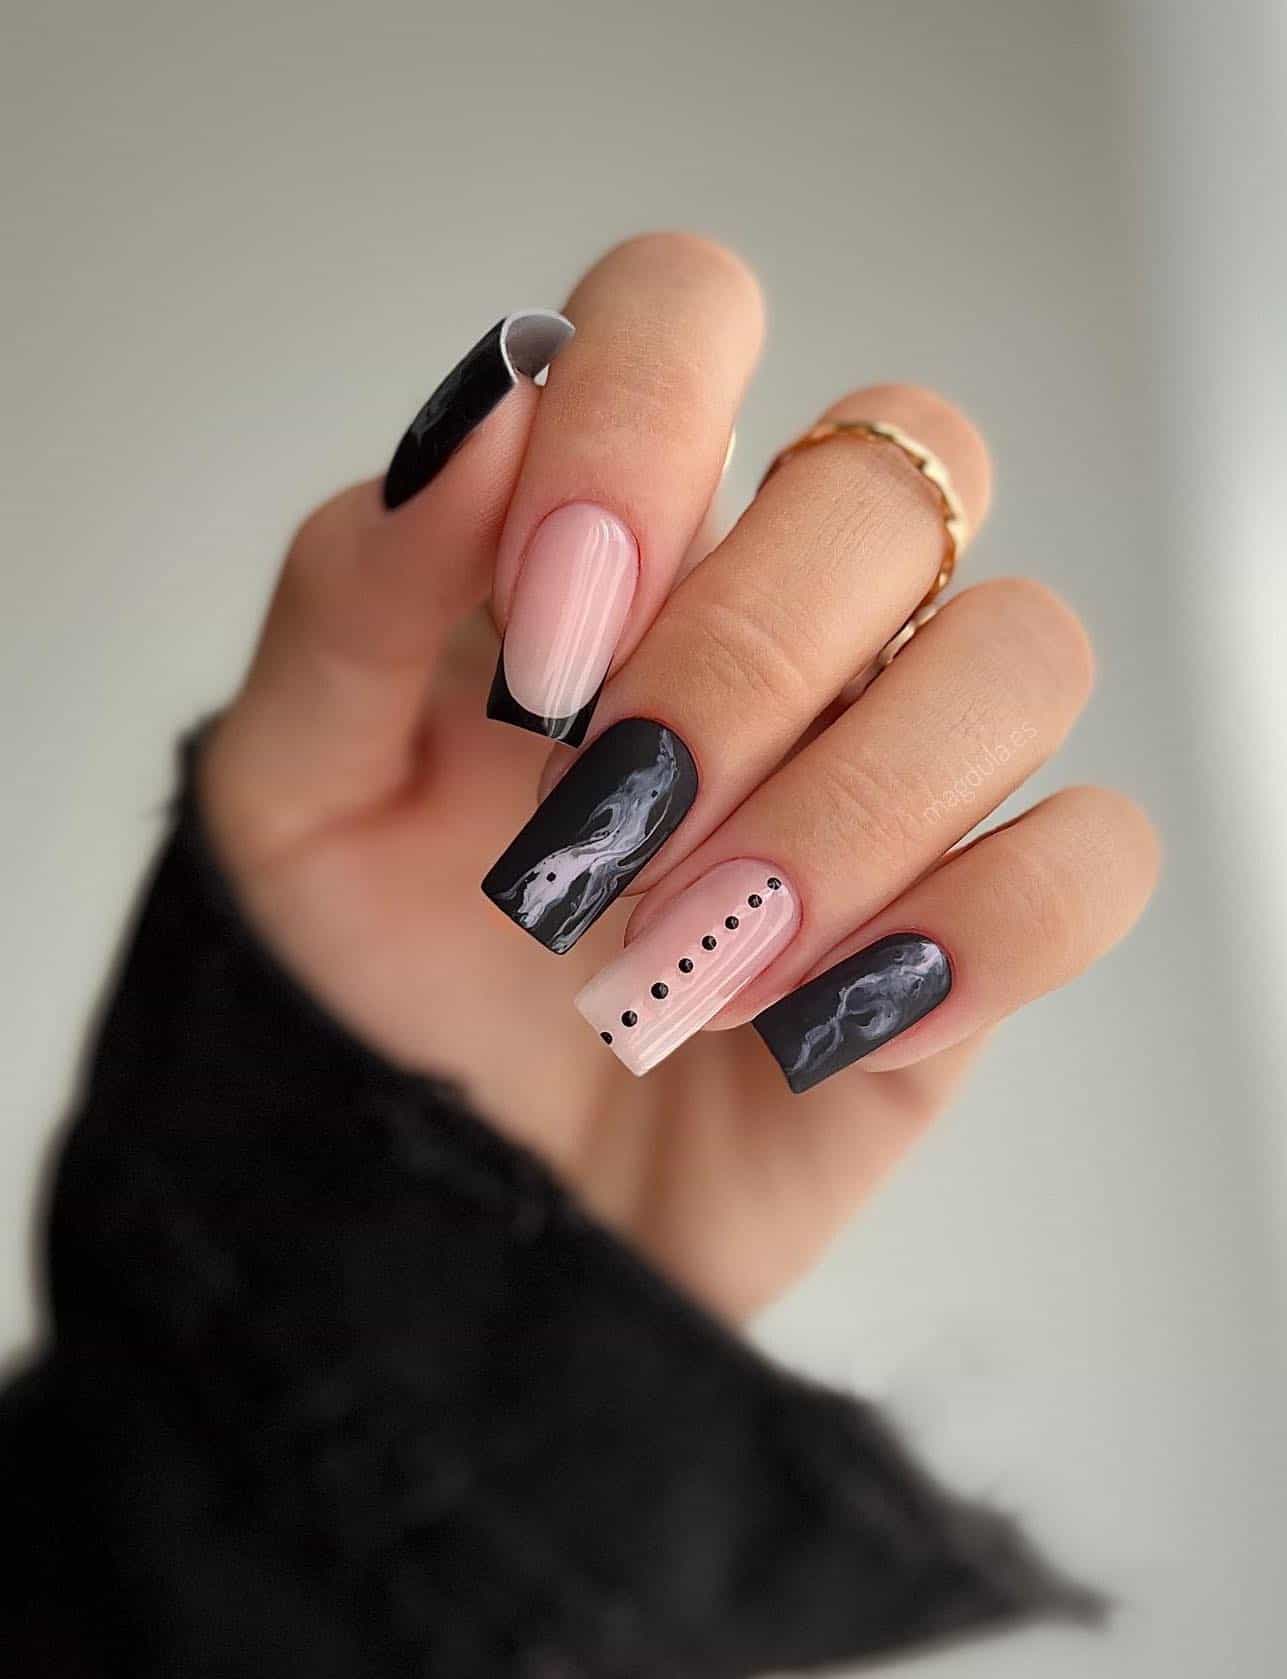 Medium length square nails with matte black marbled nails and nude nails with French tips and dot details